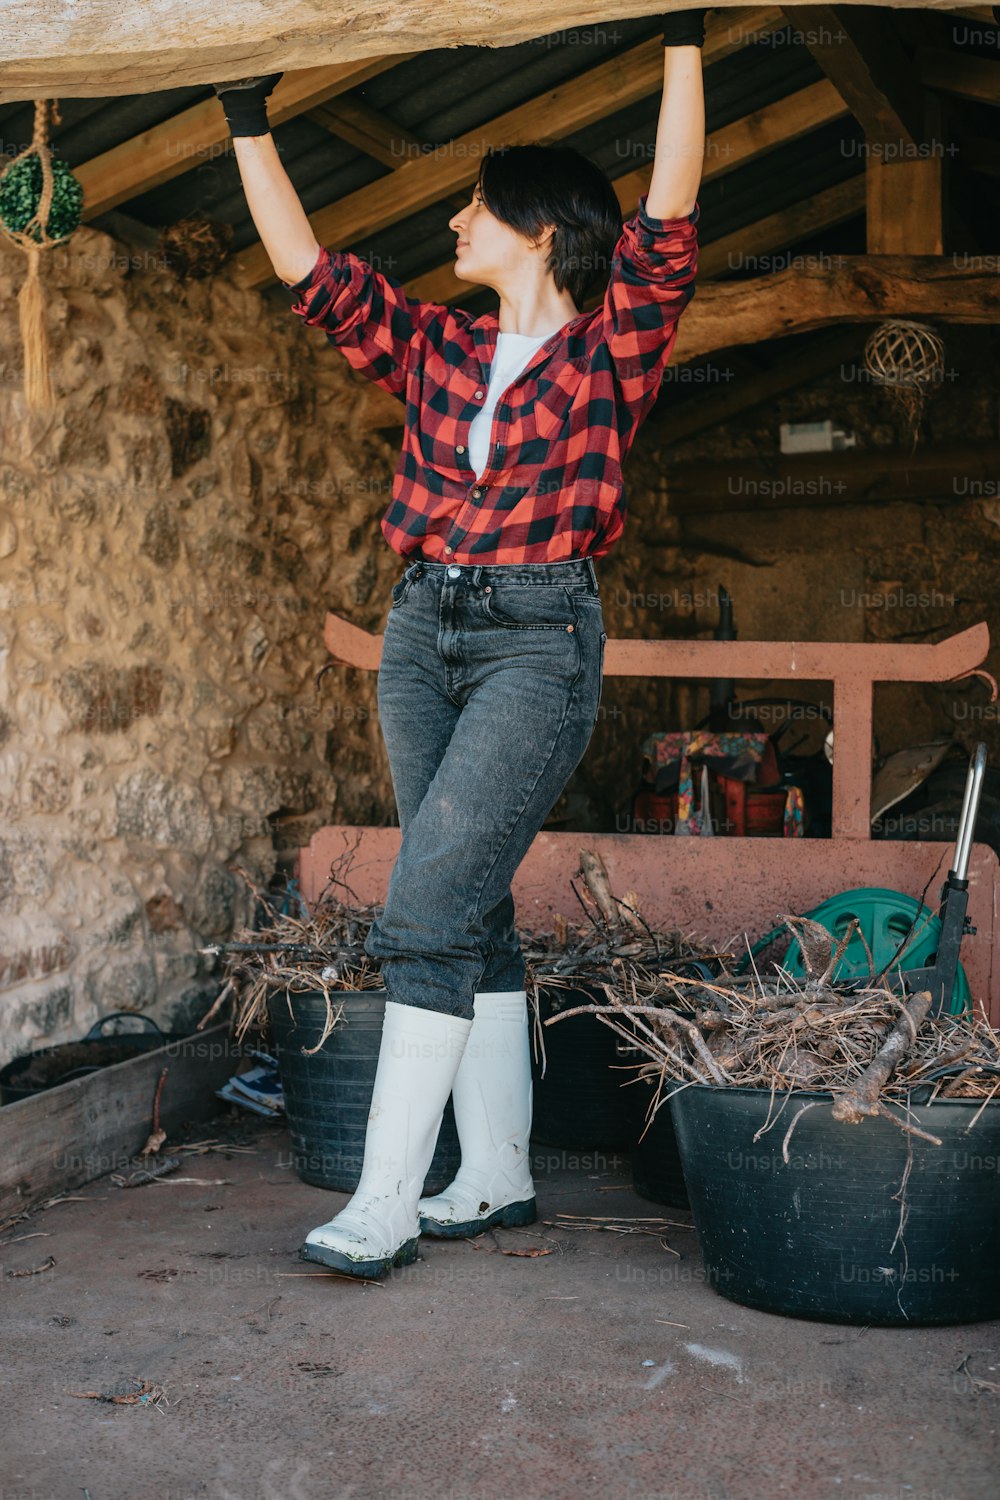 a woman in a red and black checkered shirt and white boots